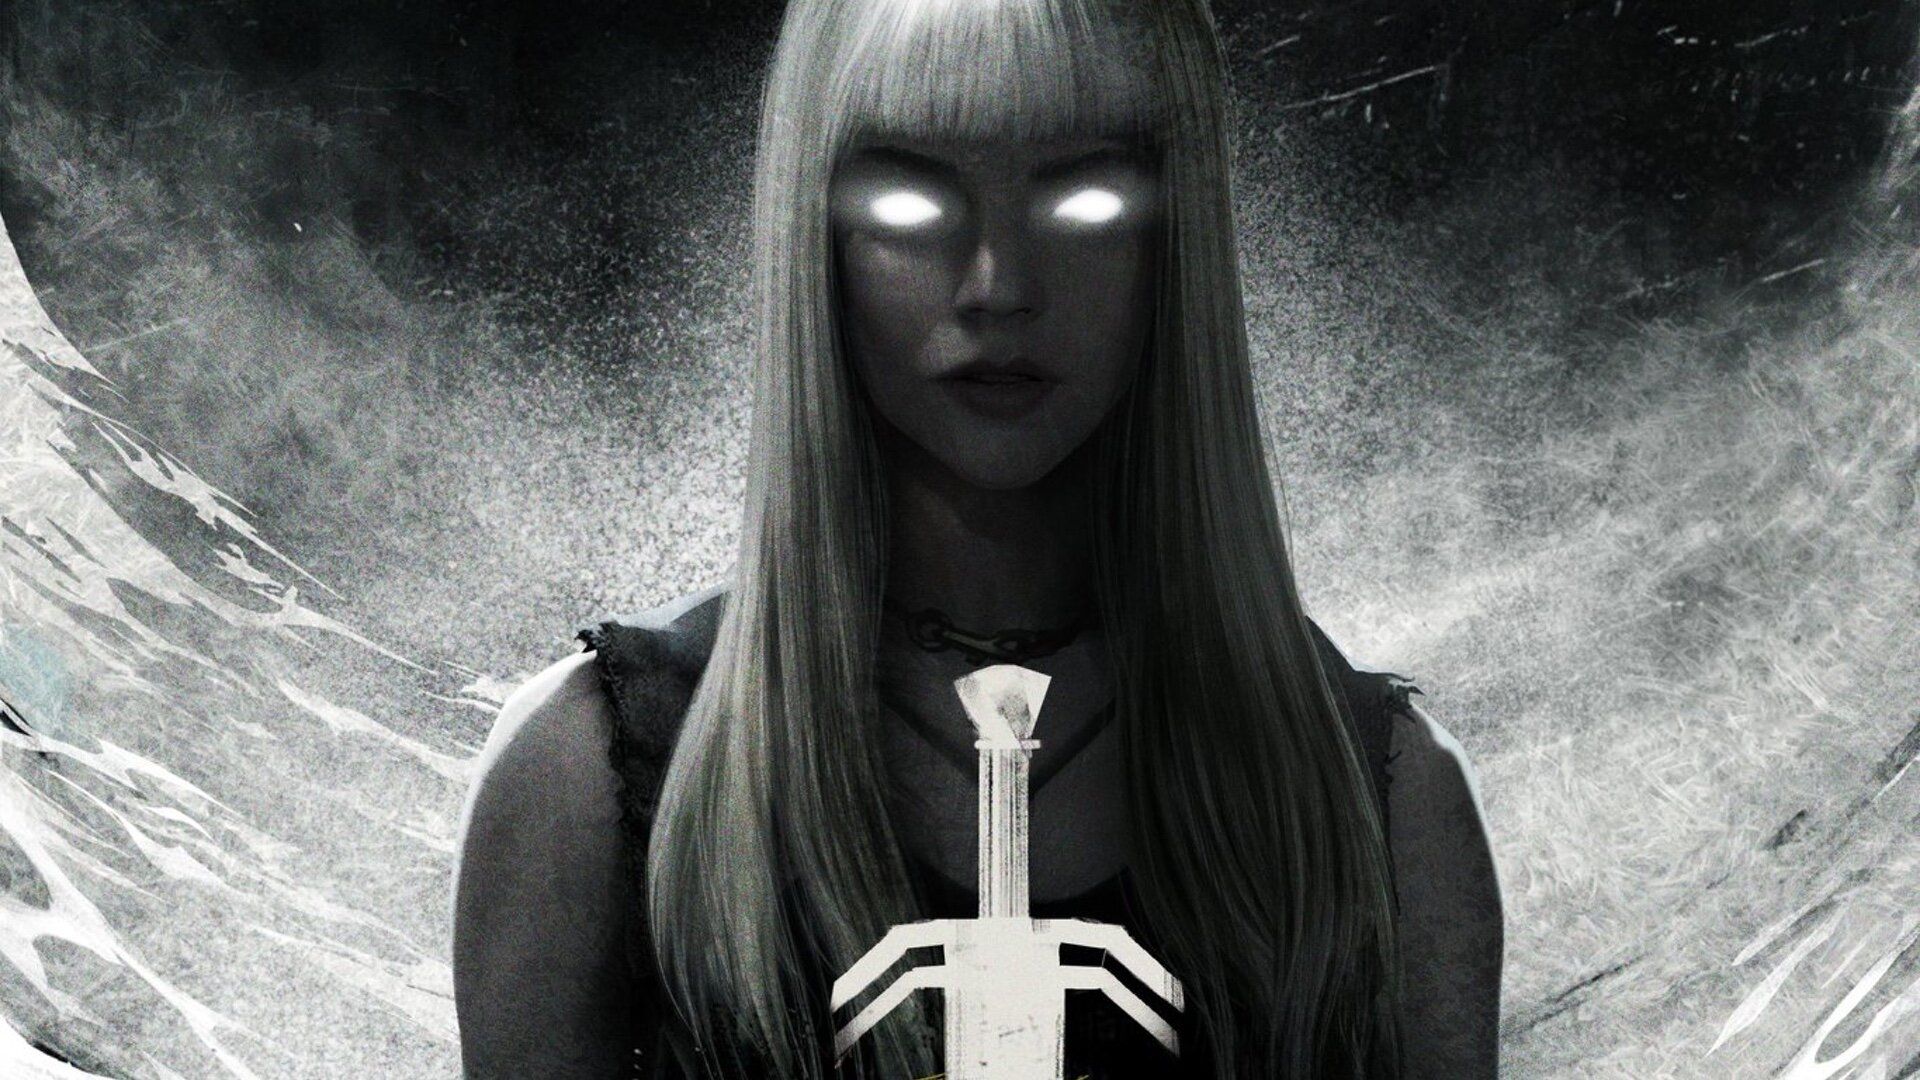 THE NEW MUTANTS Character Posters Feature The Five Mutants at the Heart of the Story